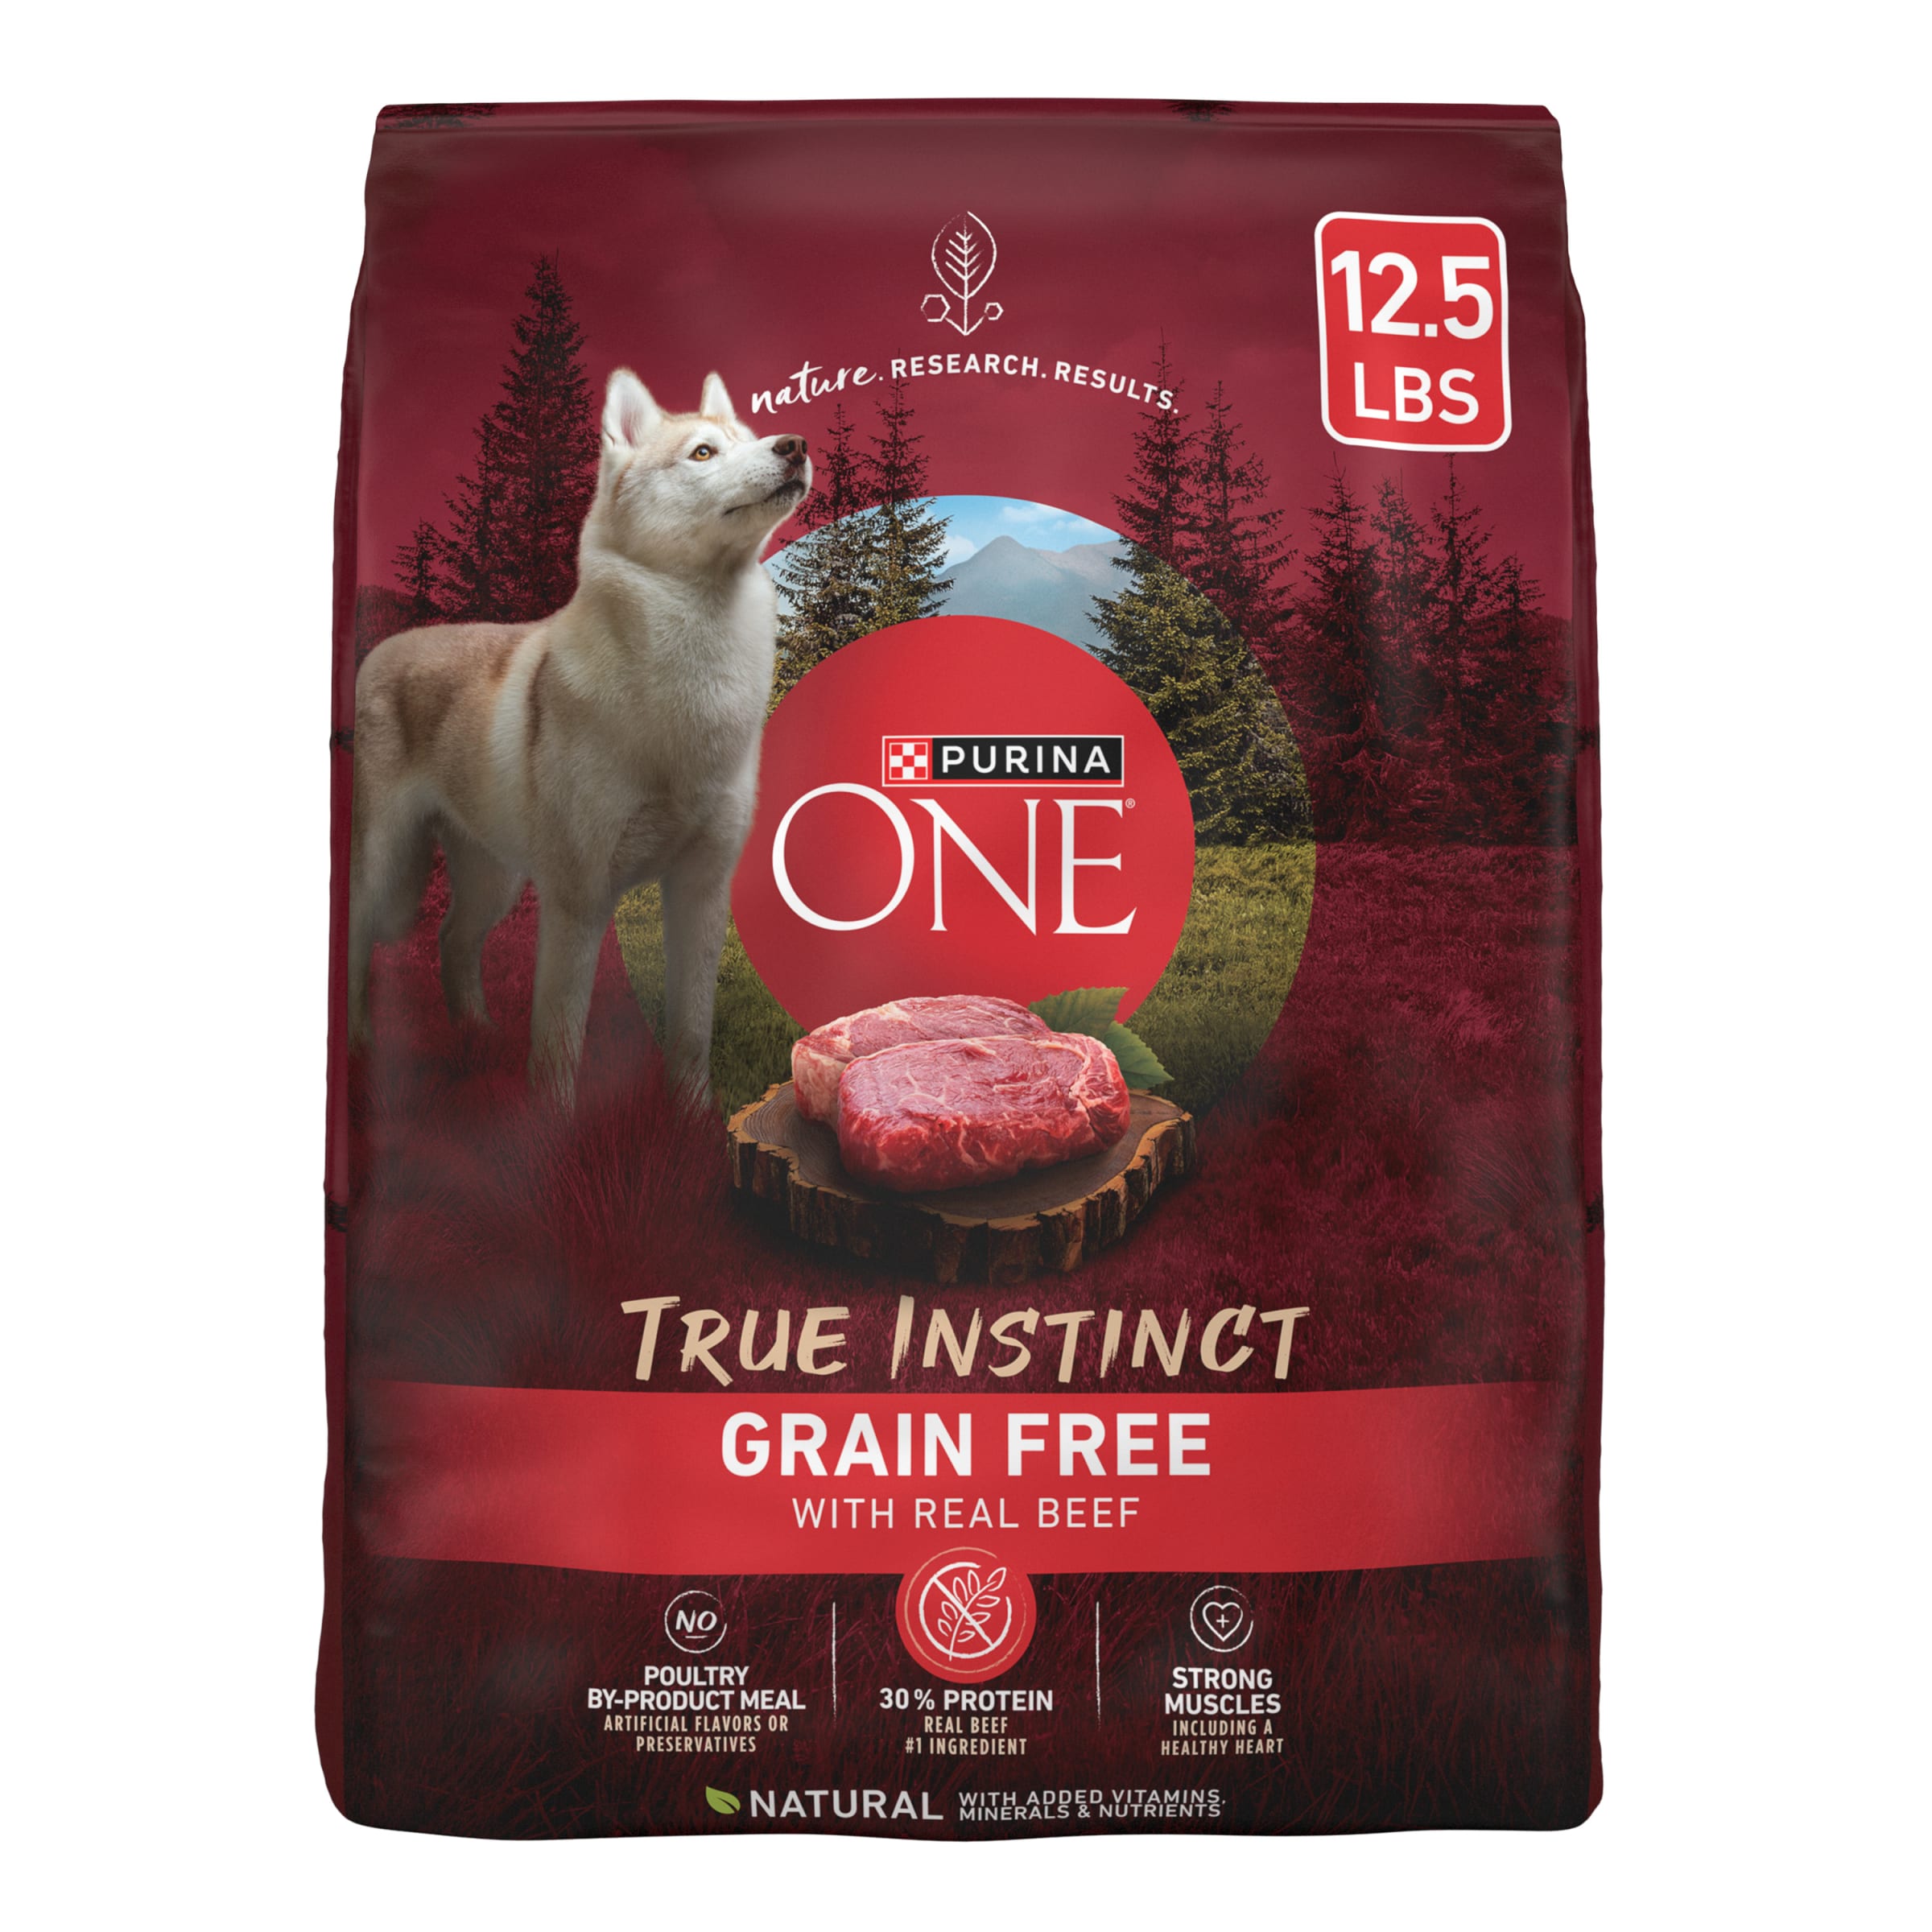 Purina One True Instinct Dry Dog Food, Muscle & Joint Support, Grain-Free Real Beef, 12.5 lb Bag - image 1 of 11